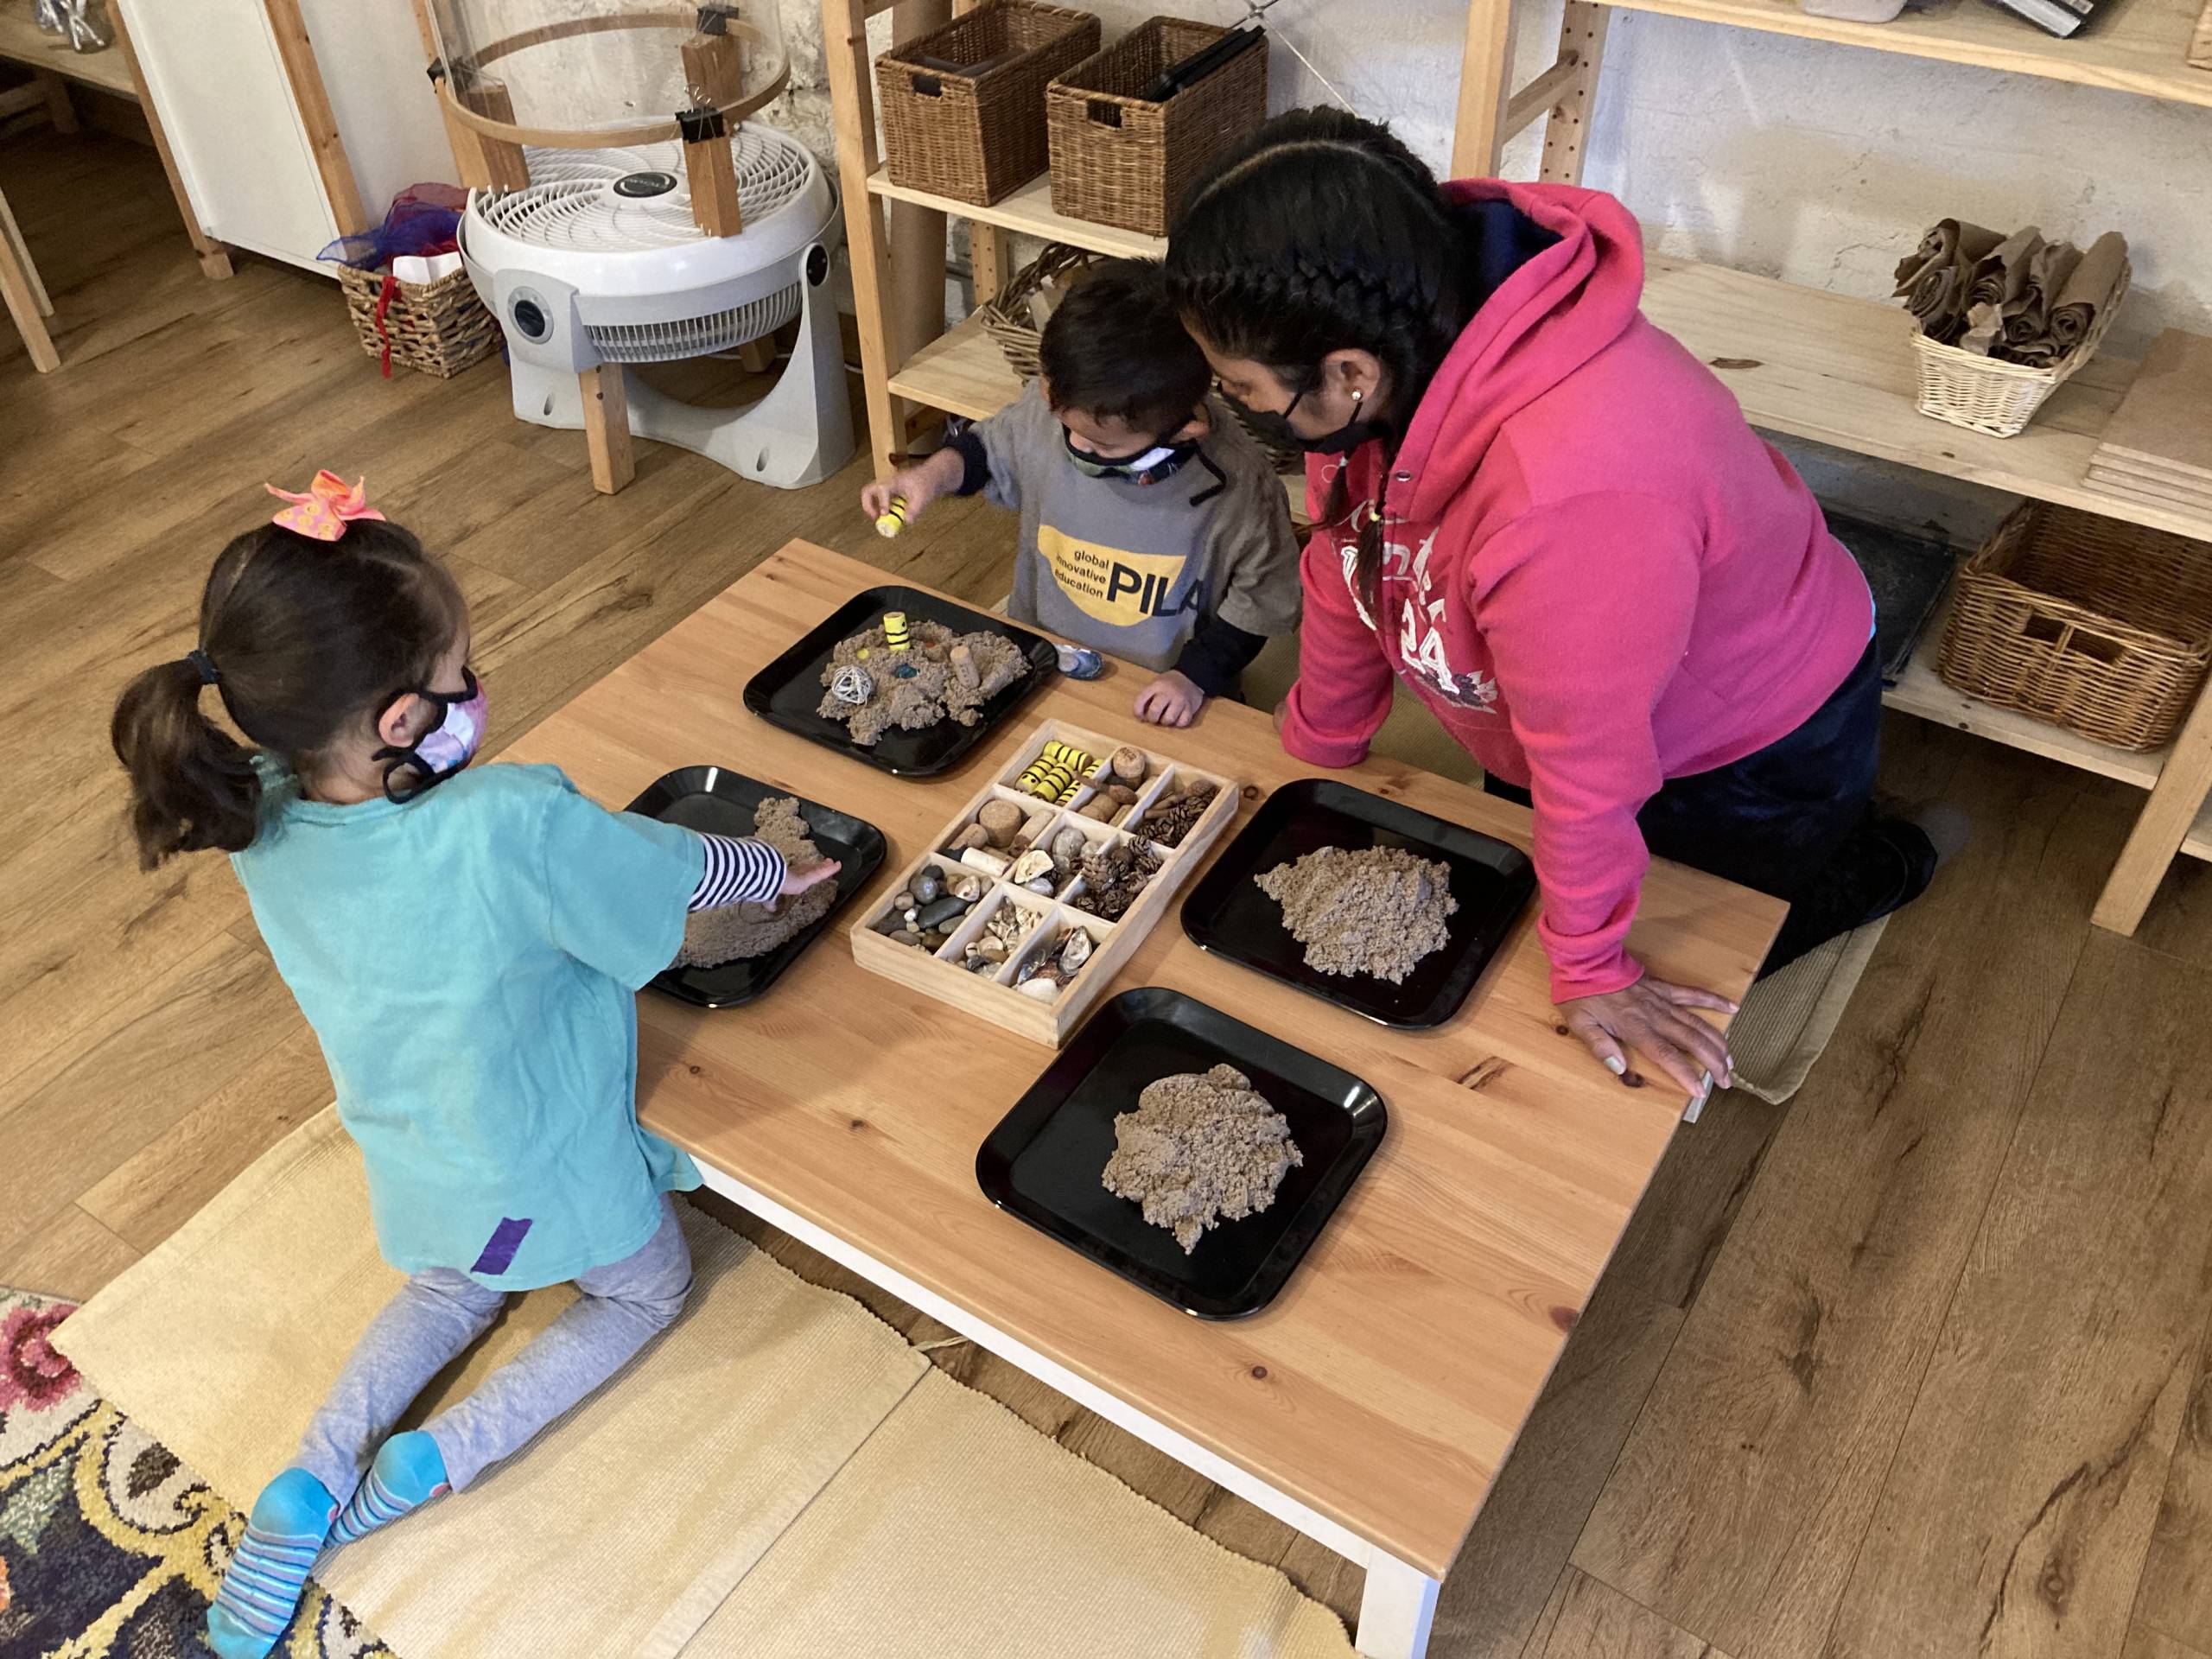 Two young students play with clay at a table, as a teacher supervises.